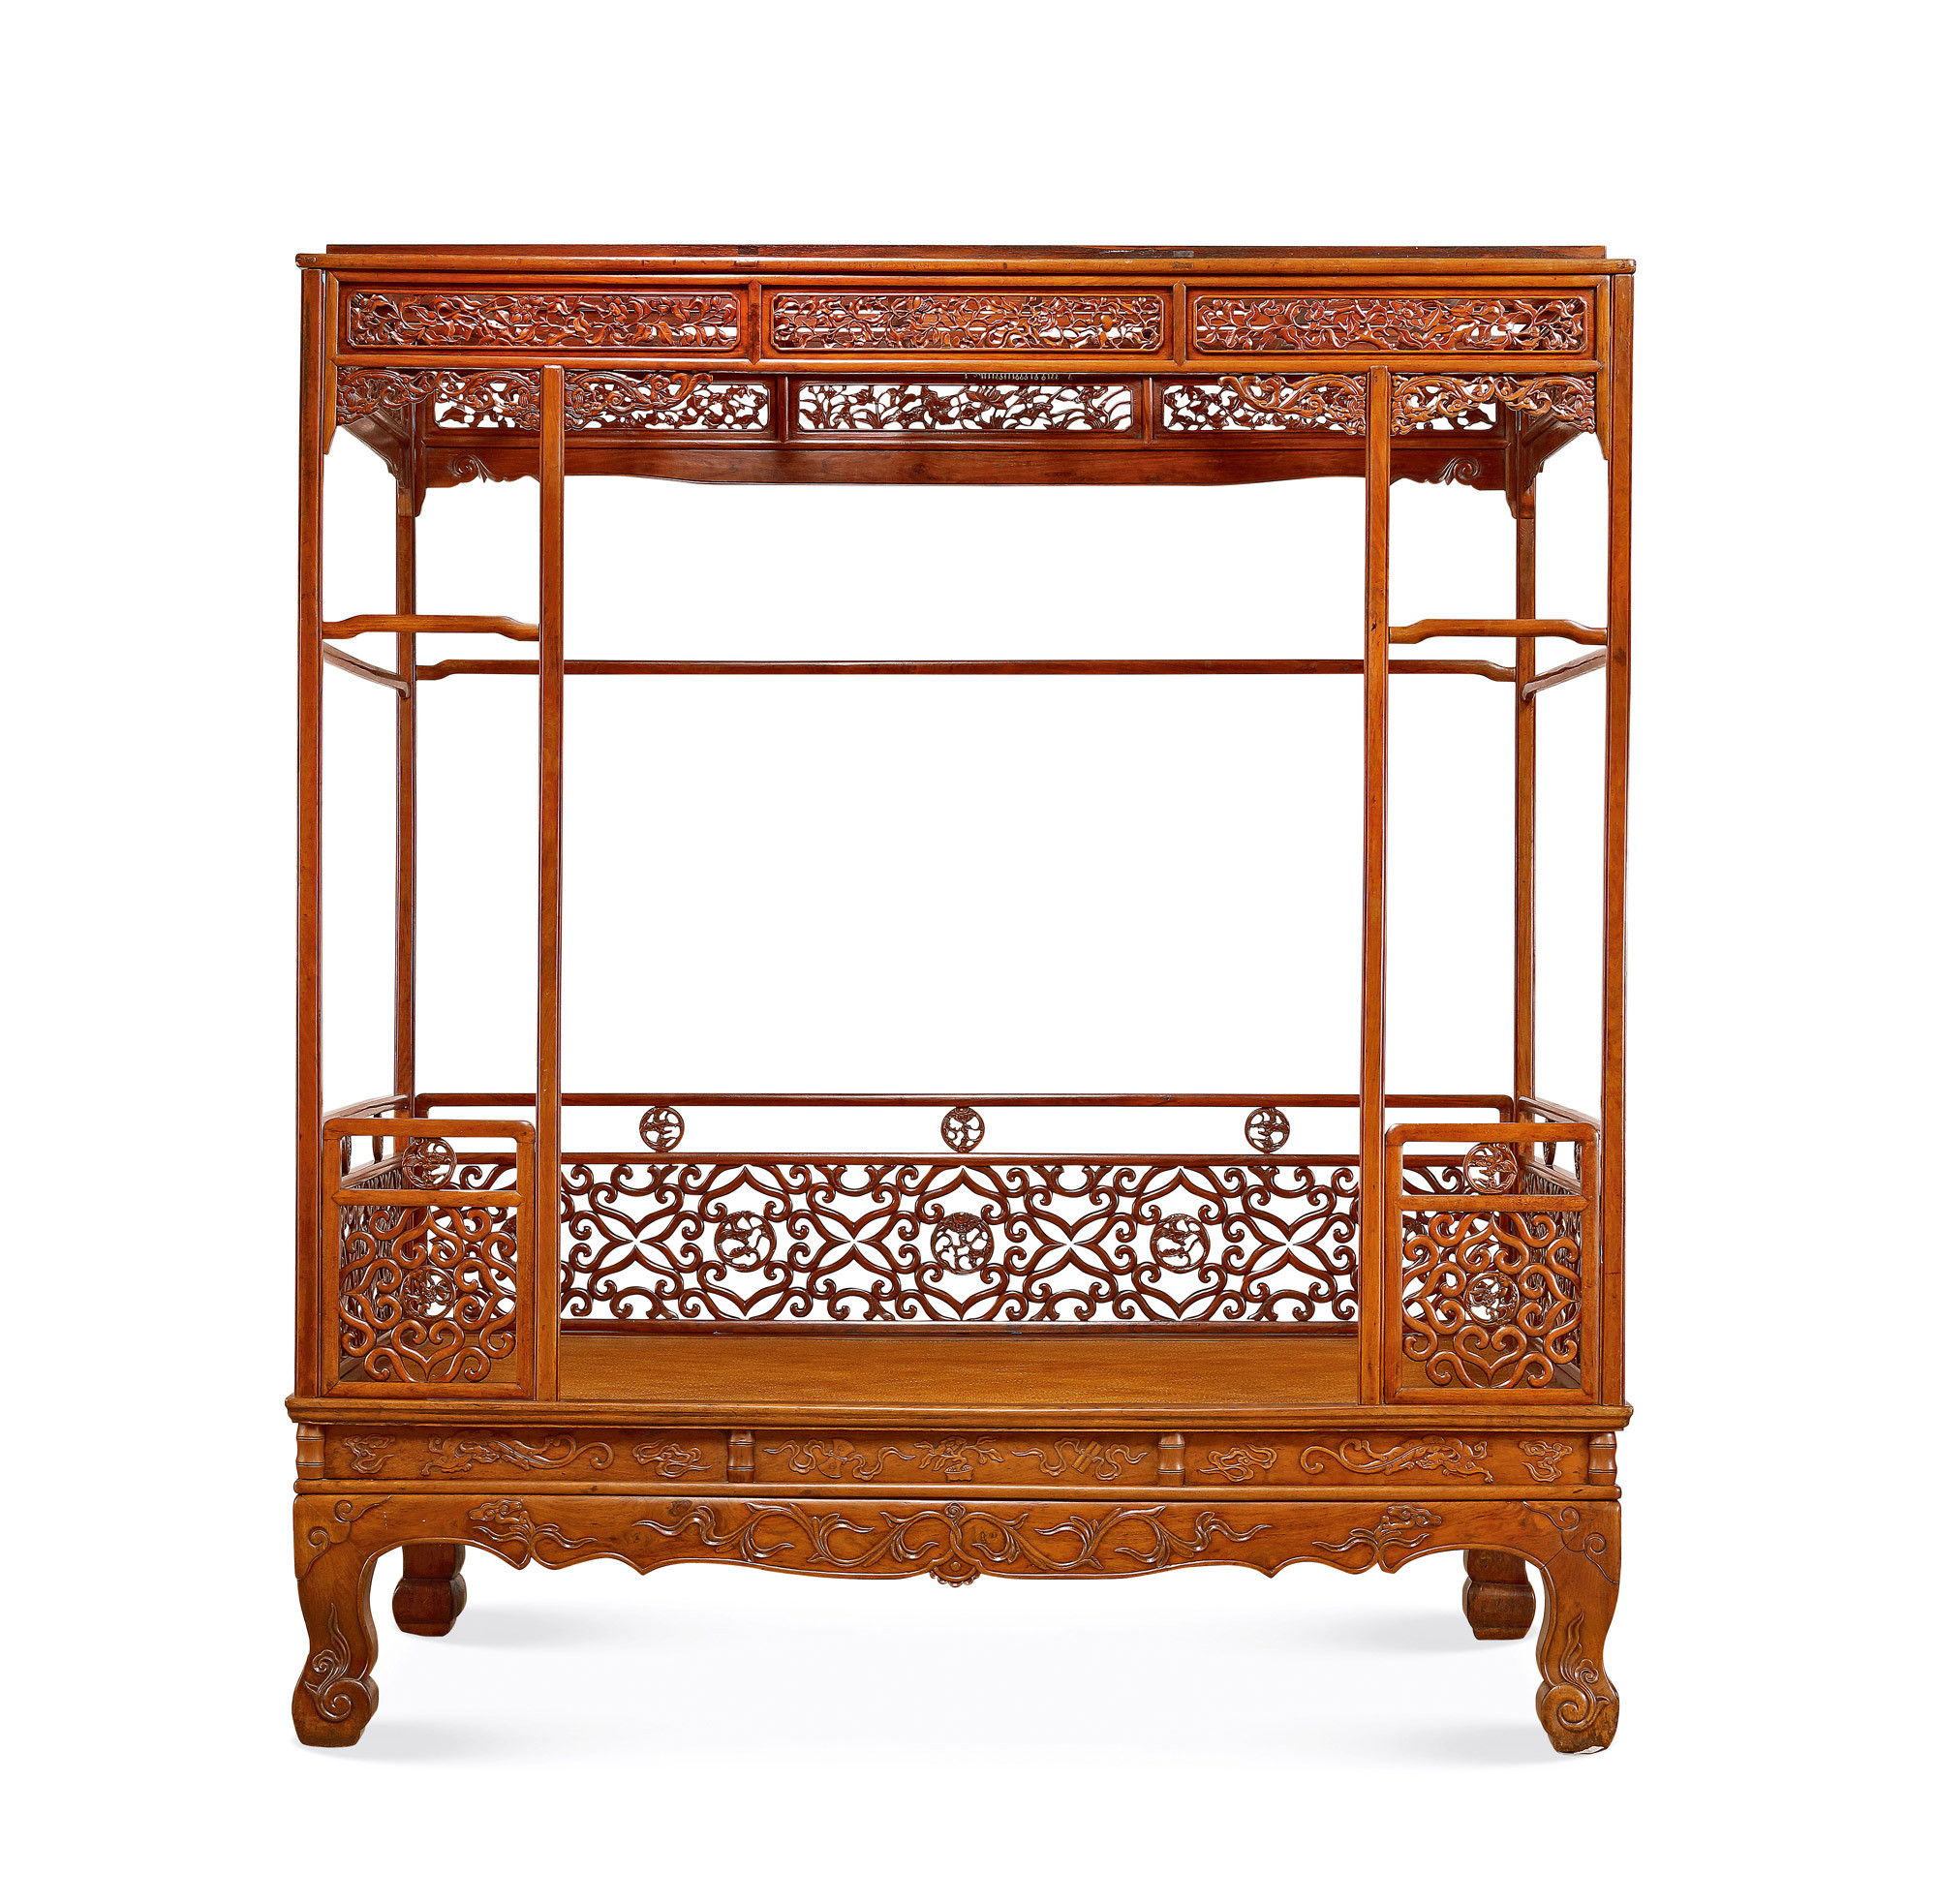 HUANGHUALI CARVED CHI-DRAGON CANOPY BED WITH SIX PILLARS